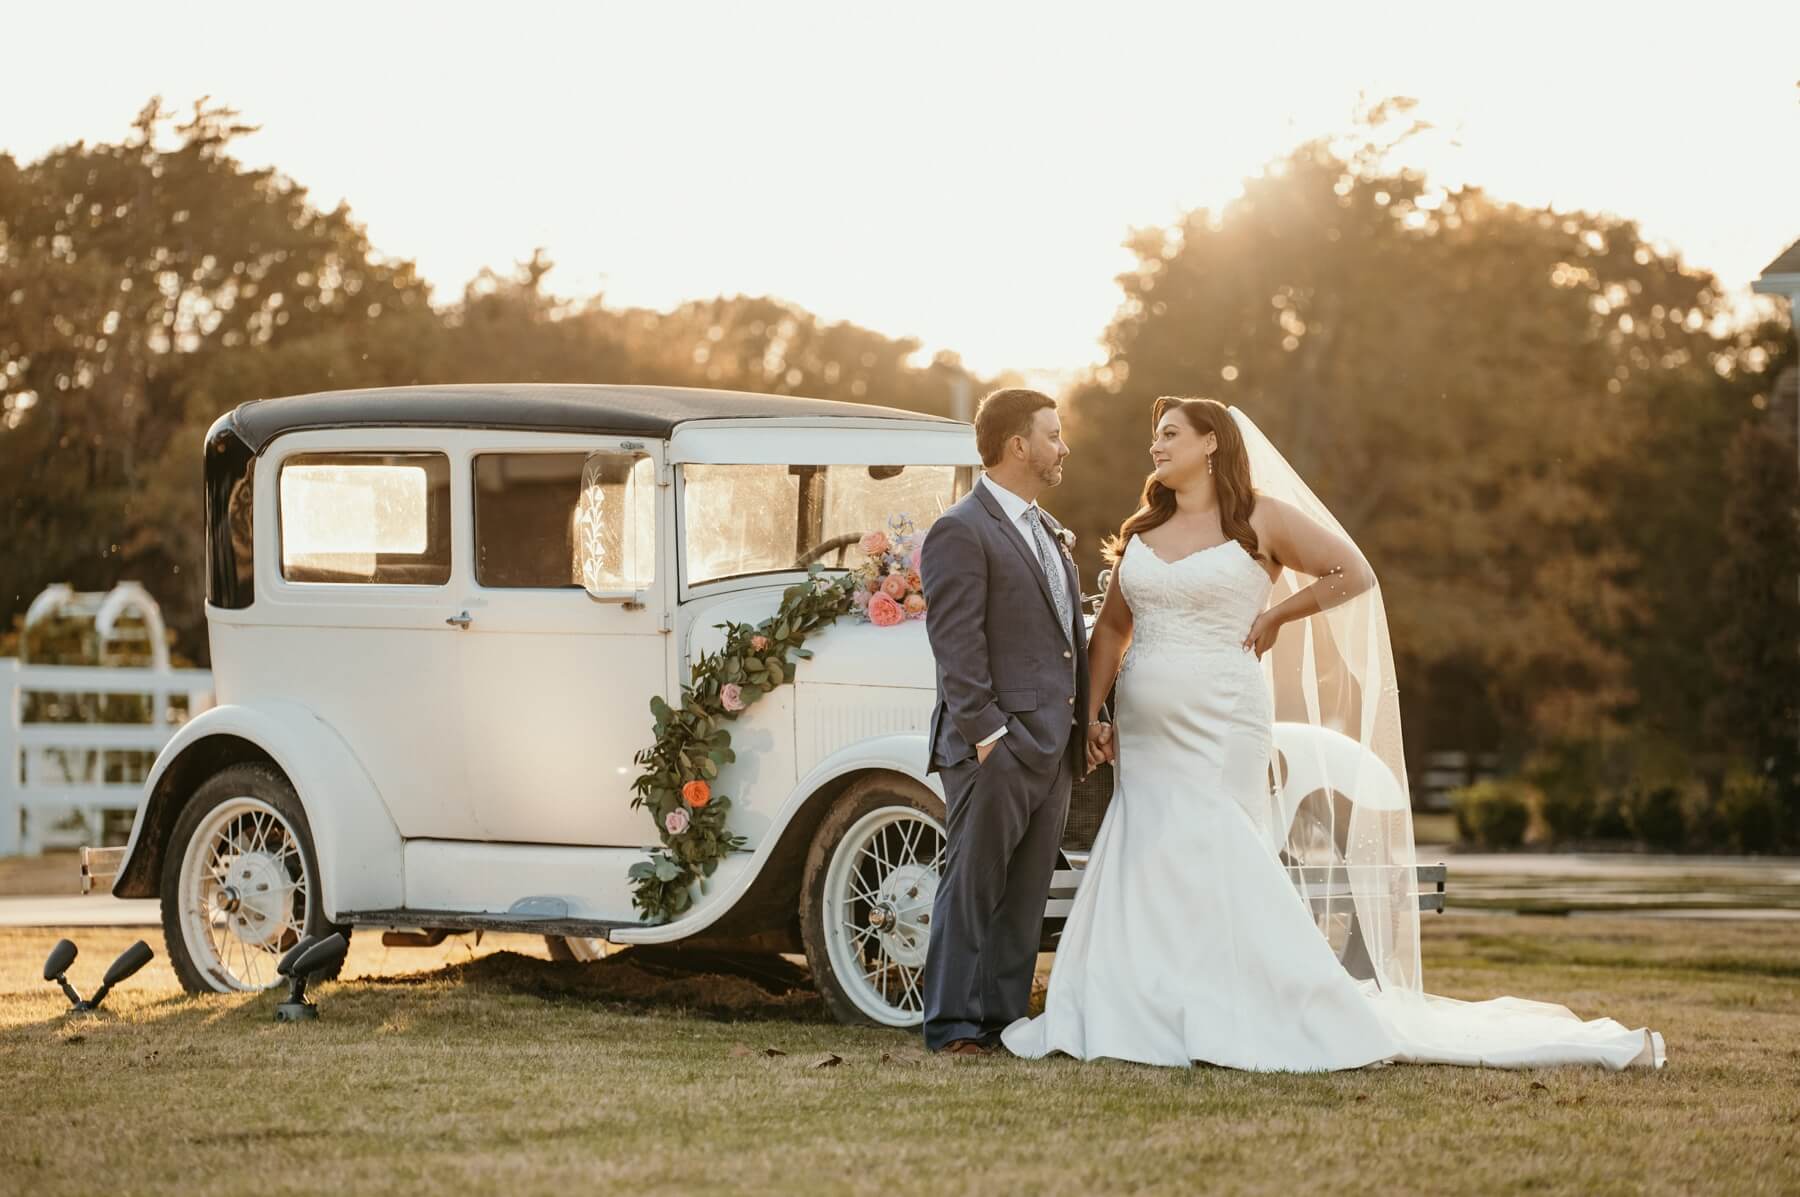 Bride and groom looking at each other in front of vintage car